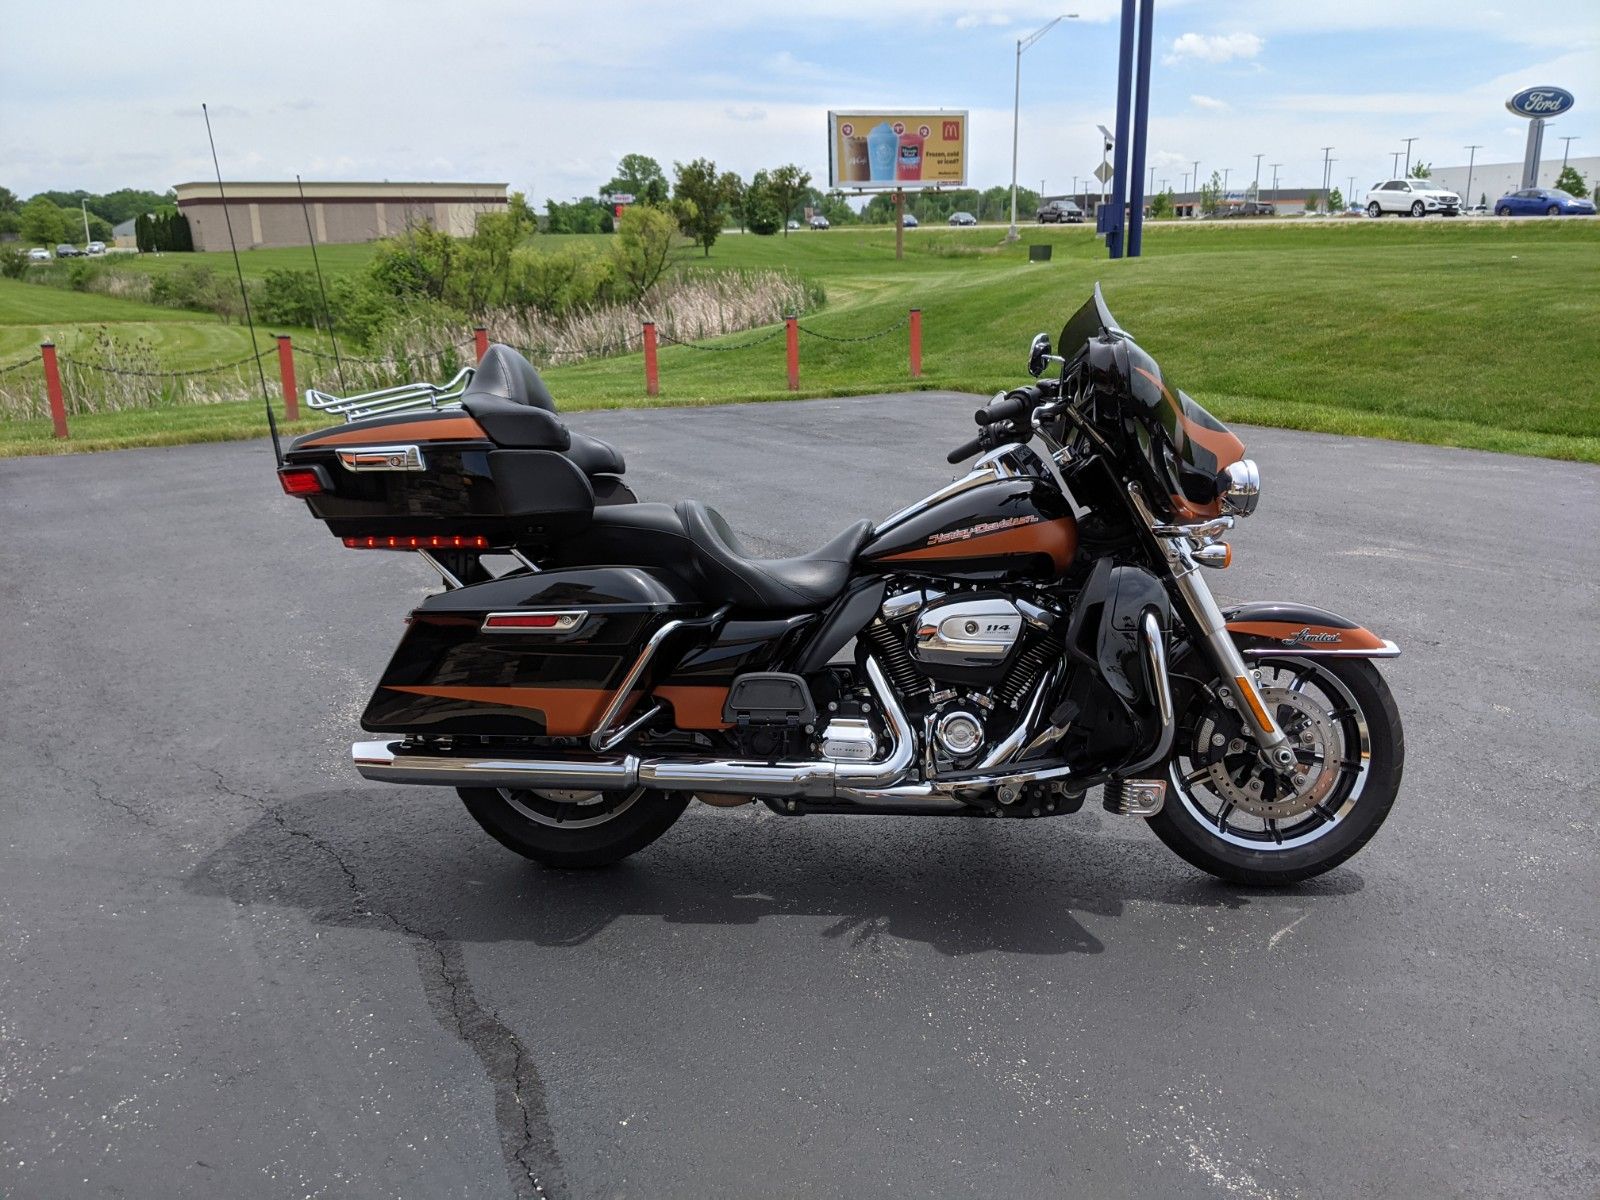 Used 2019 Harley Davidson Ultra Limited Vivid Black Motorcycles In Muncie In 21 49a